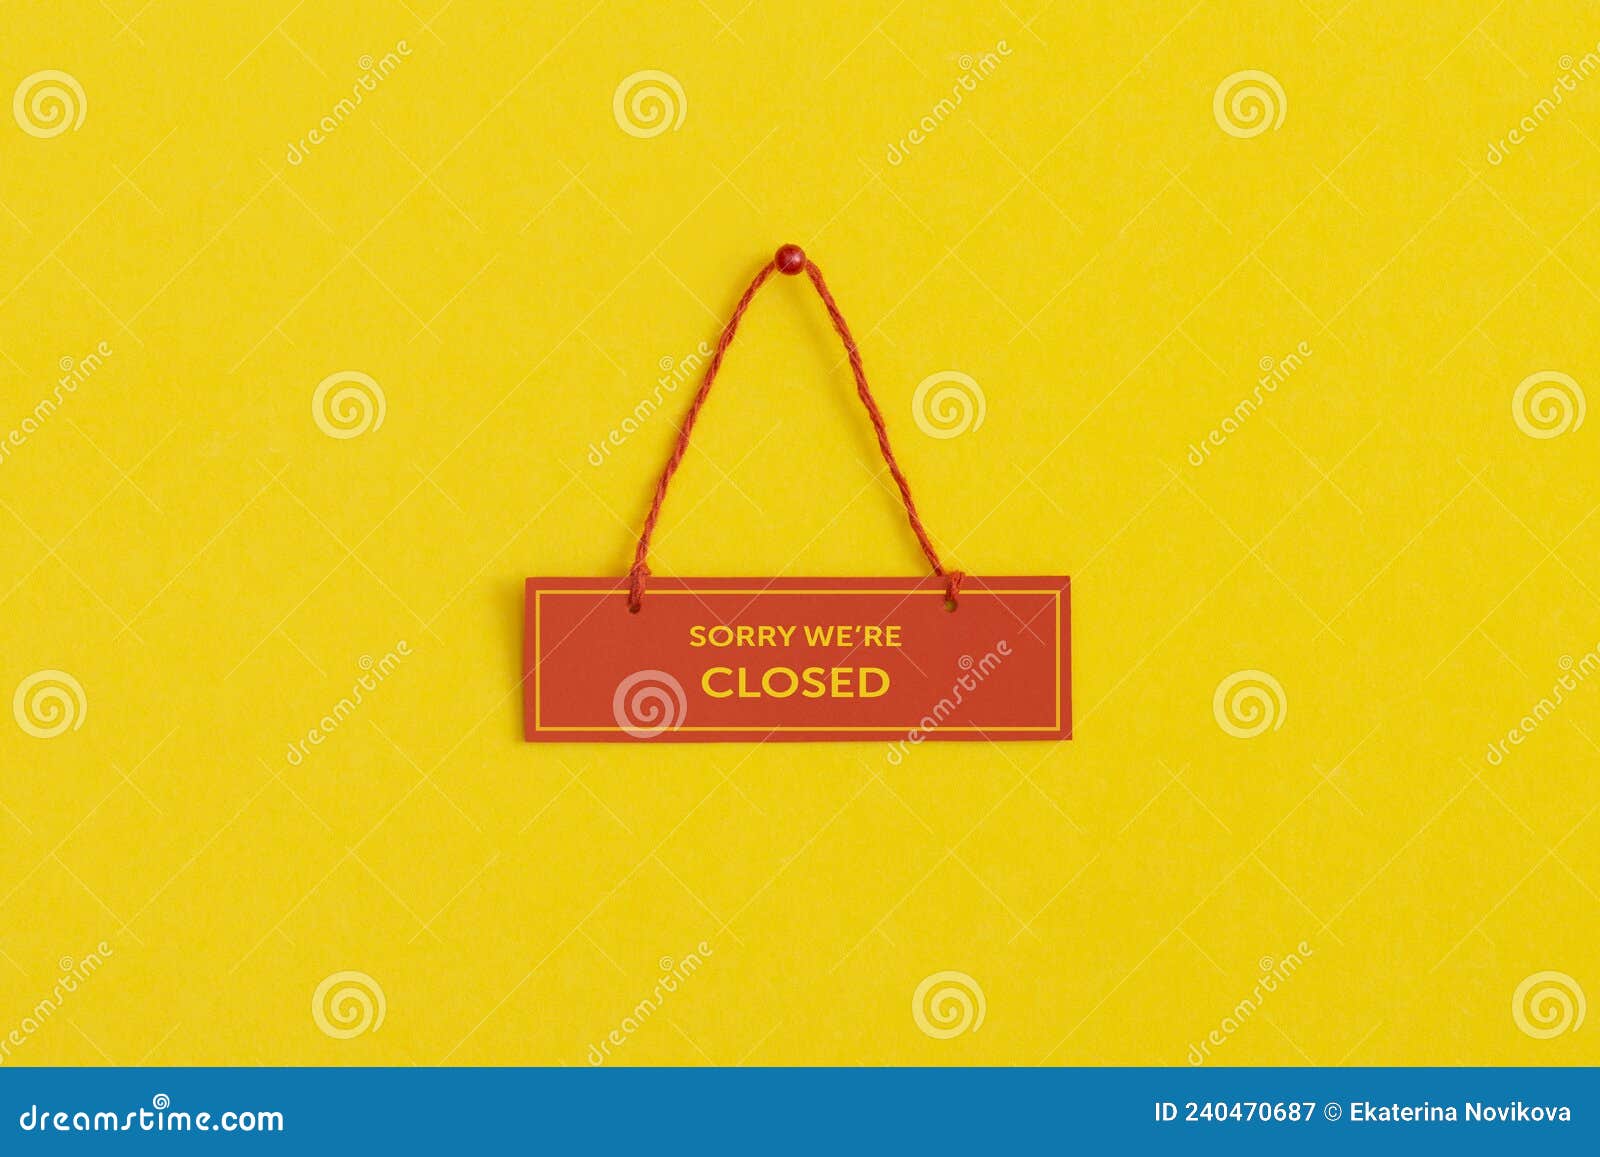 sorry, we`re closed. plate on yellow background